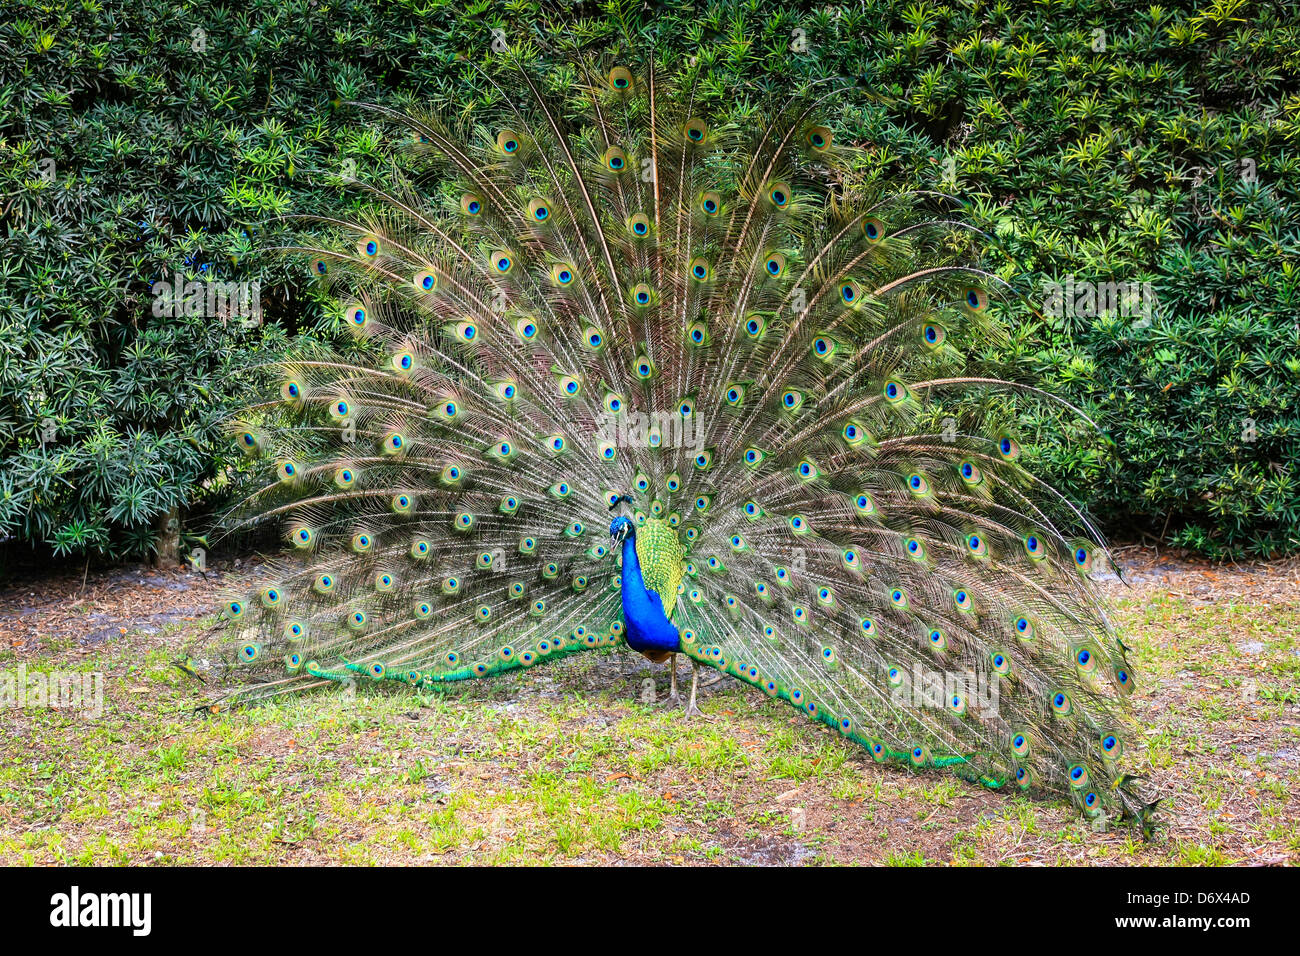 Male Peacock performing his courtship routine during spring season Stock Photo